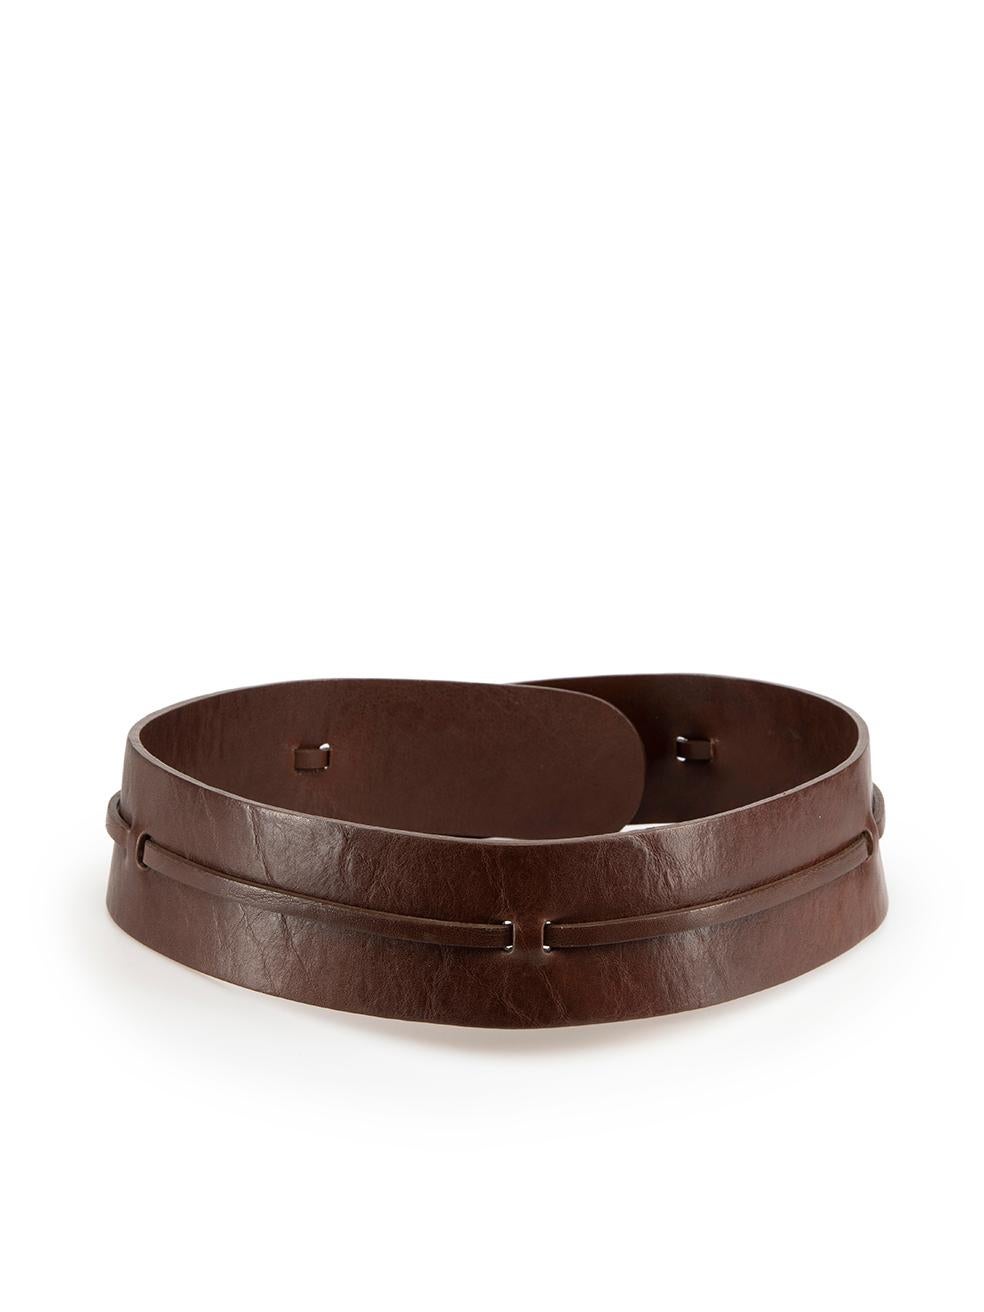 Brunello Cucinelli Brown Leather Wide Clasp Belt In Good Condition For Sale In London, GB